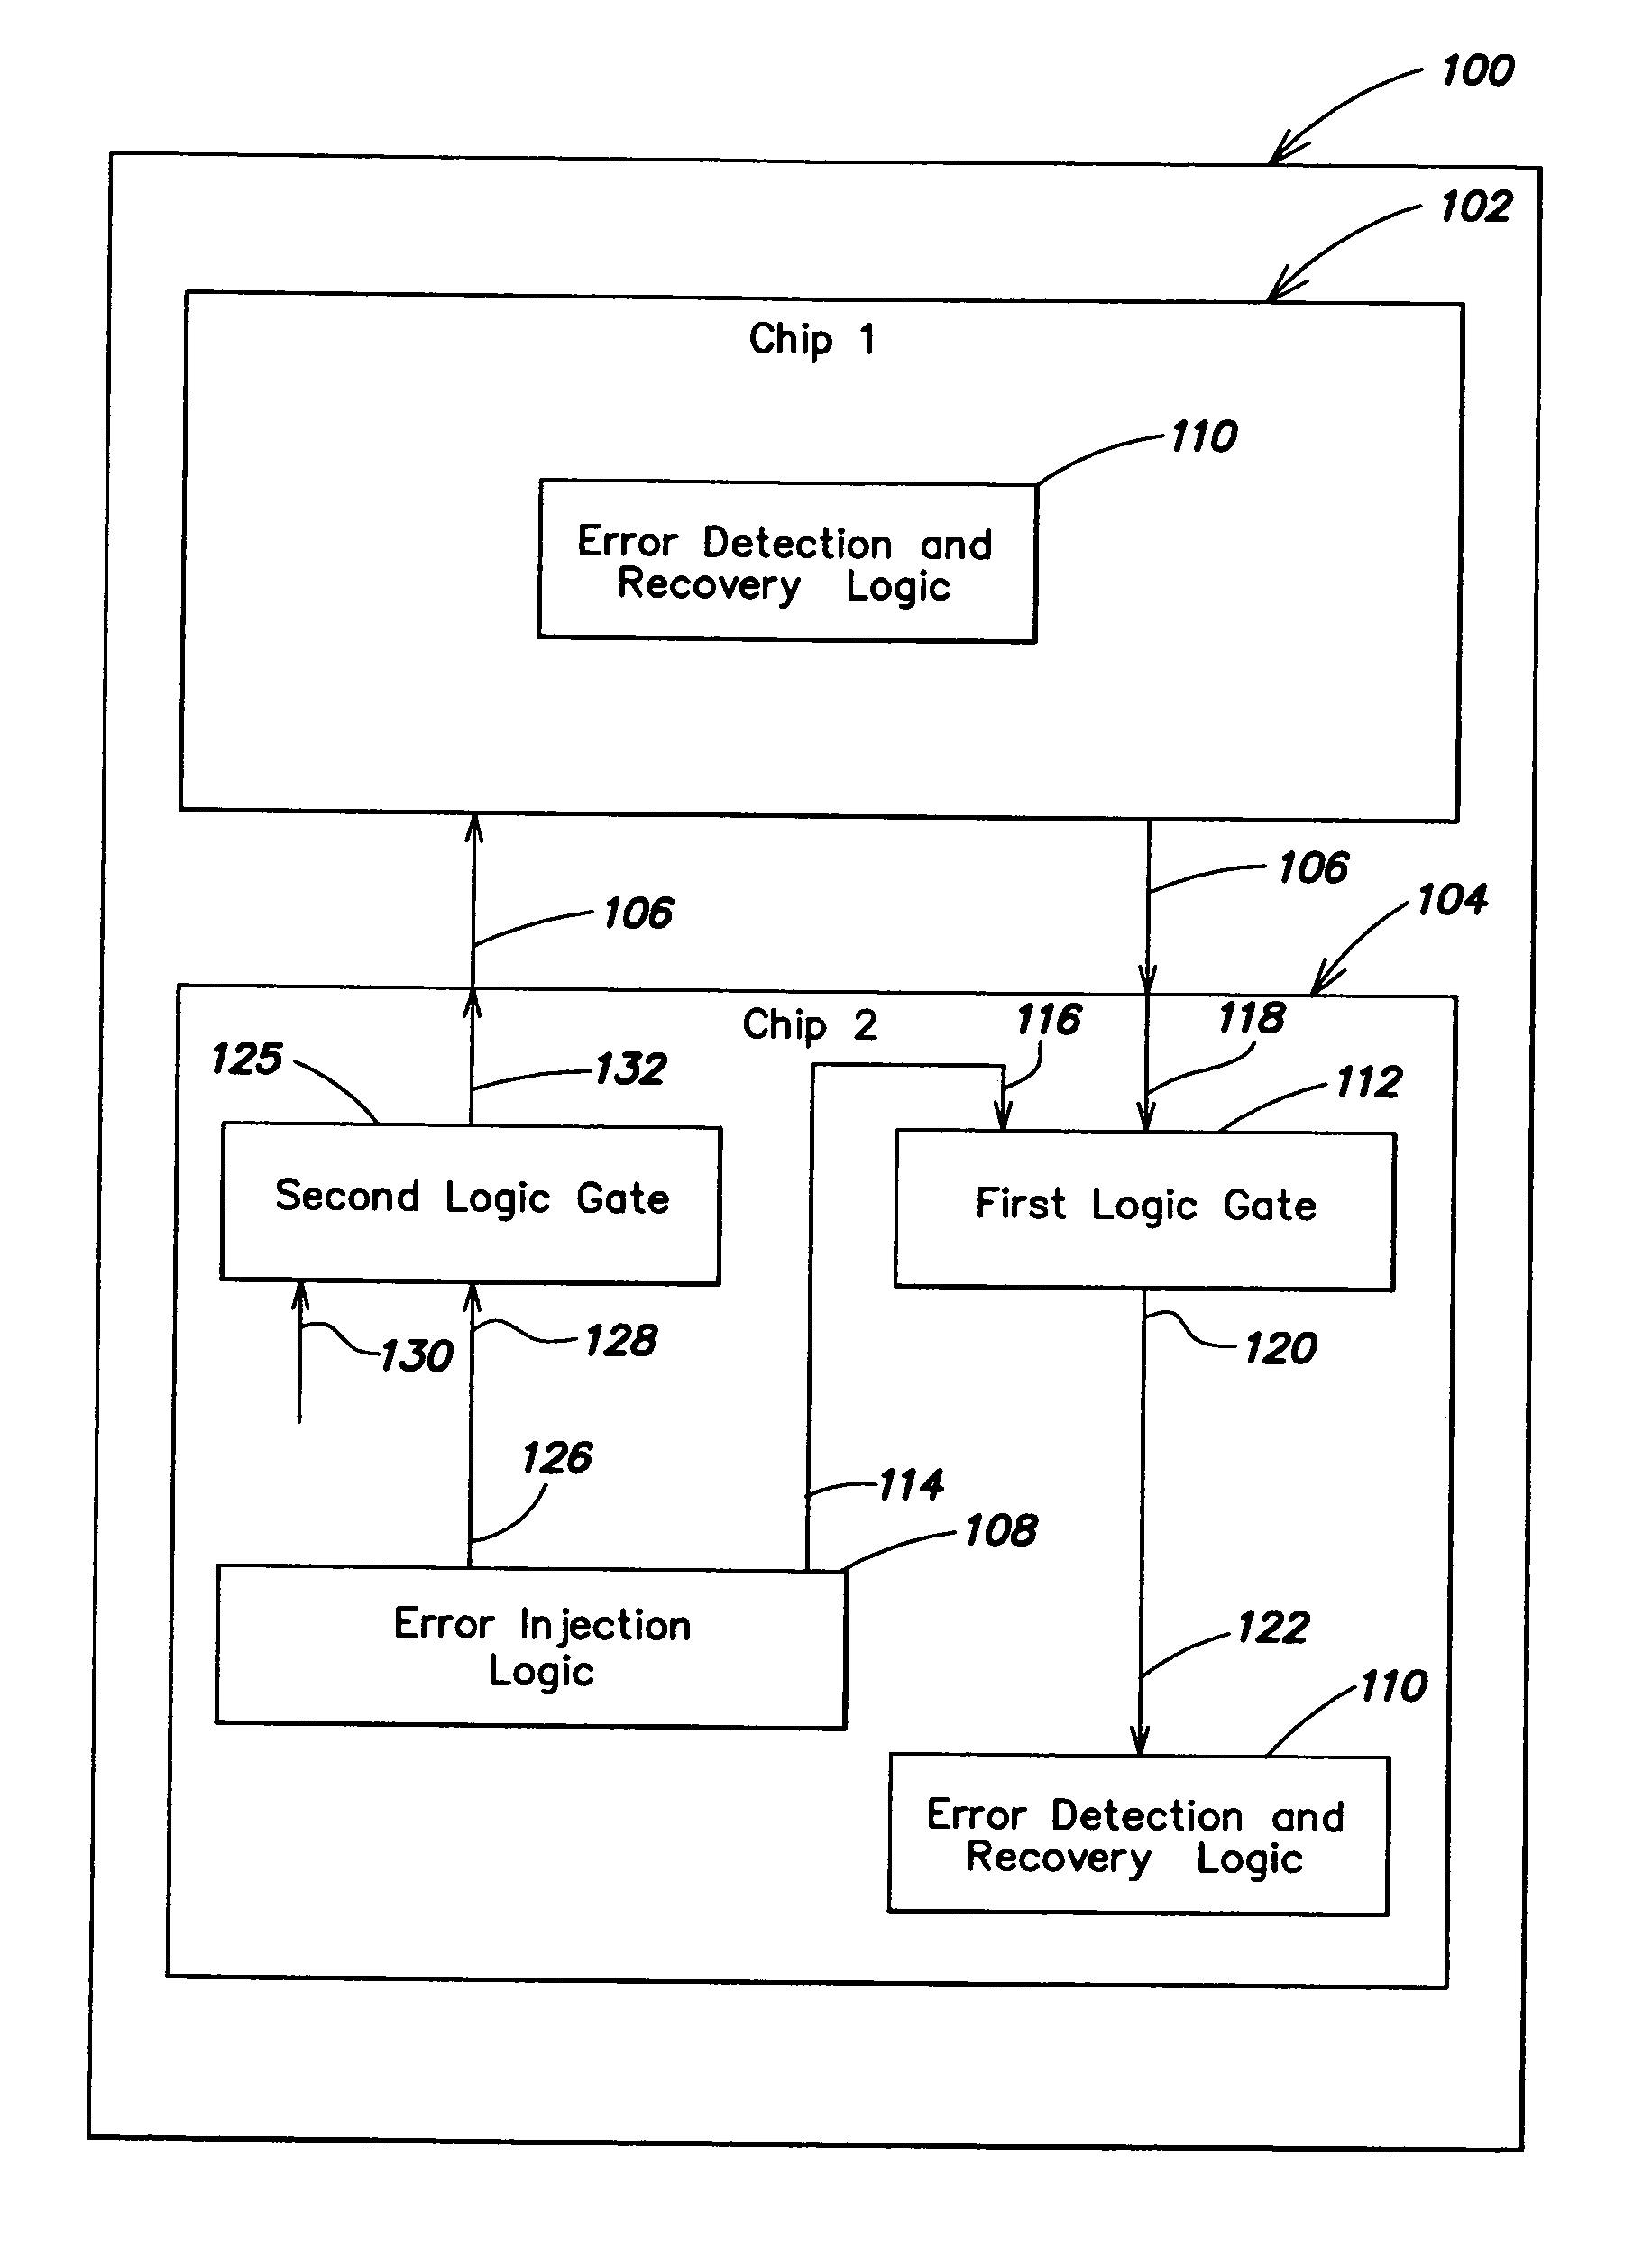 Methods and apparatus for error injection